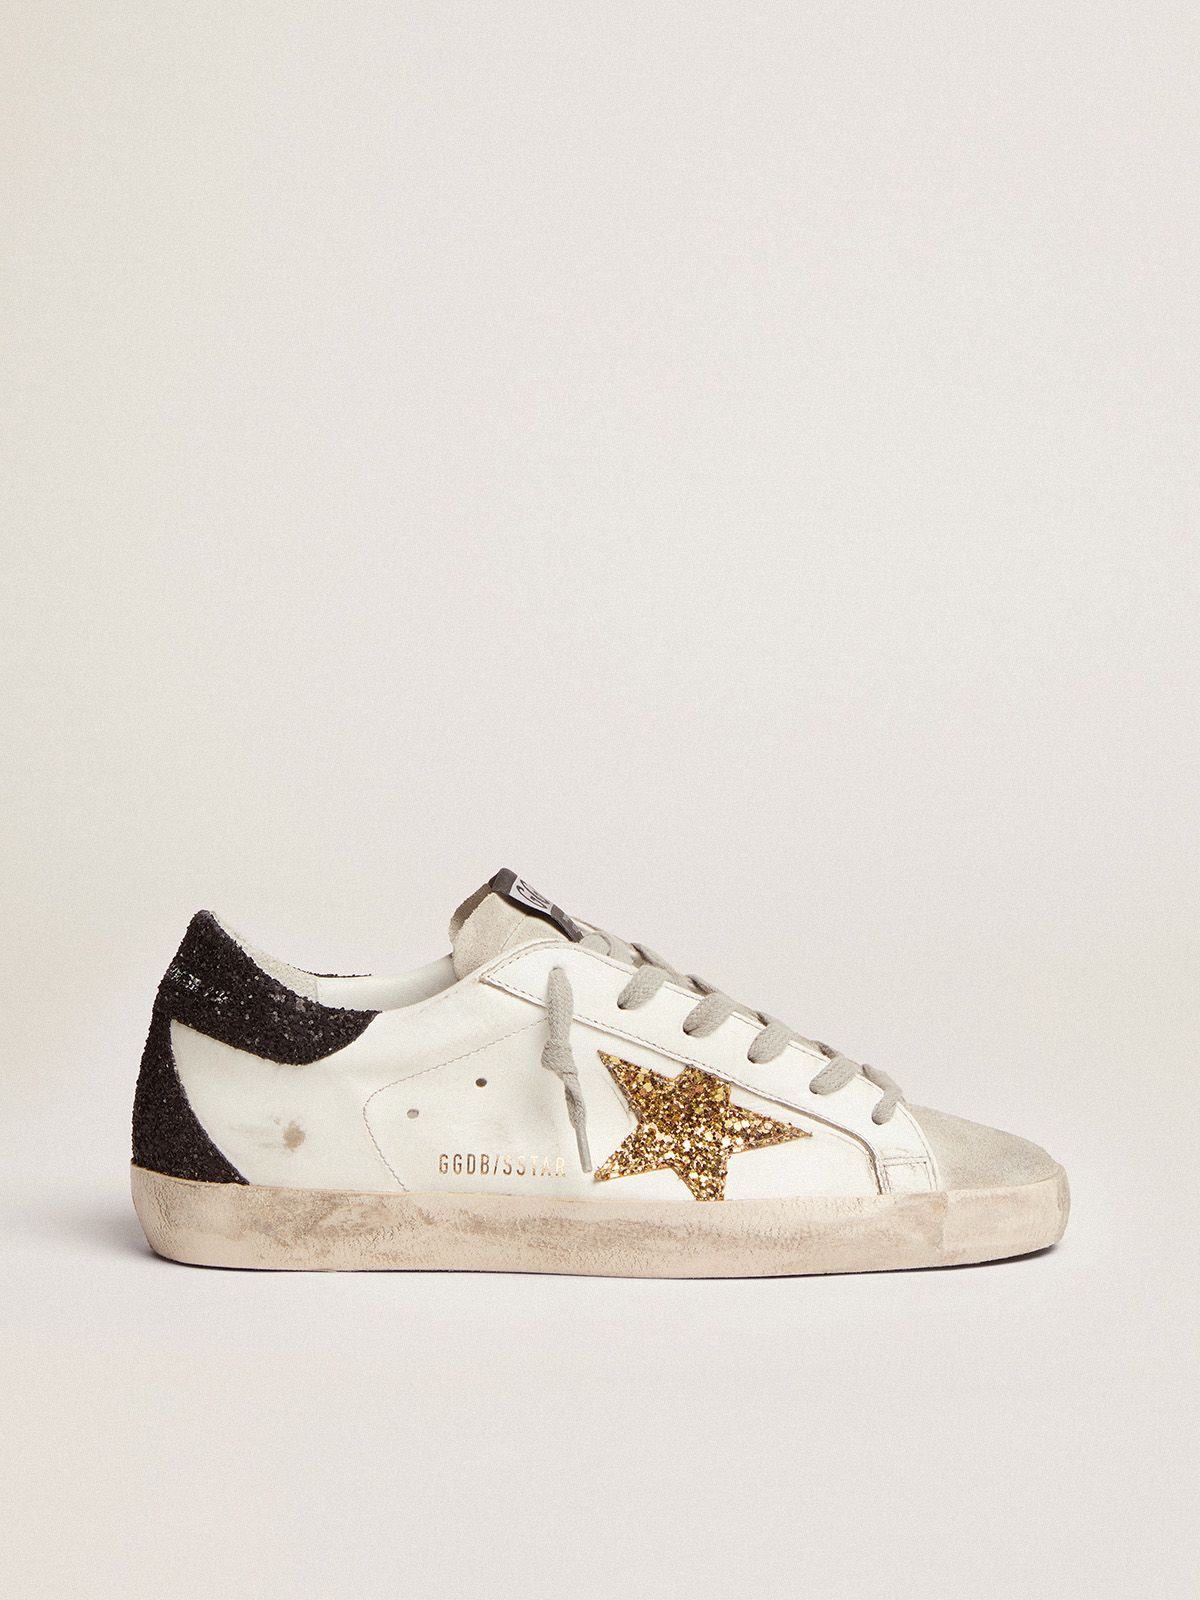 golden goose Super-Star black tab sneakers gold star with heel glittery and